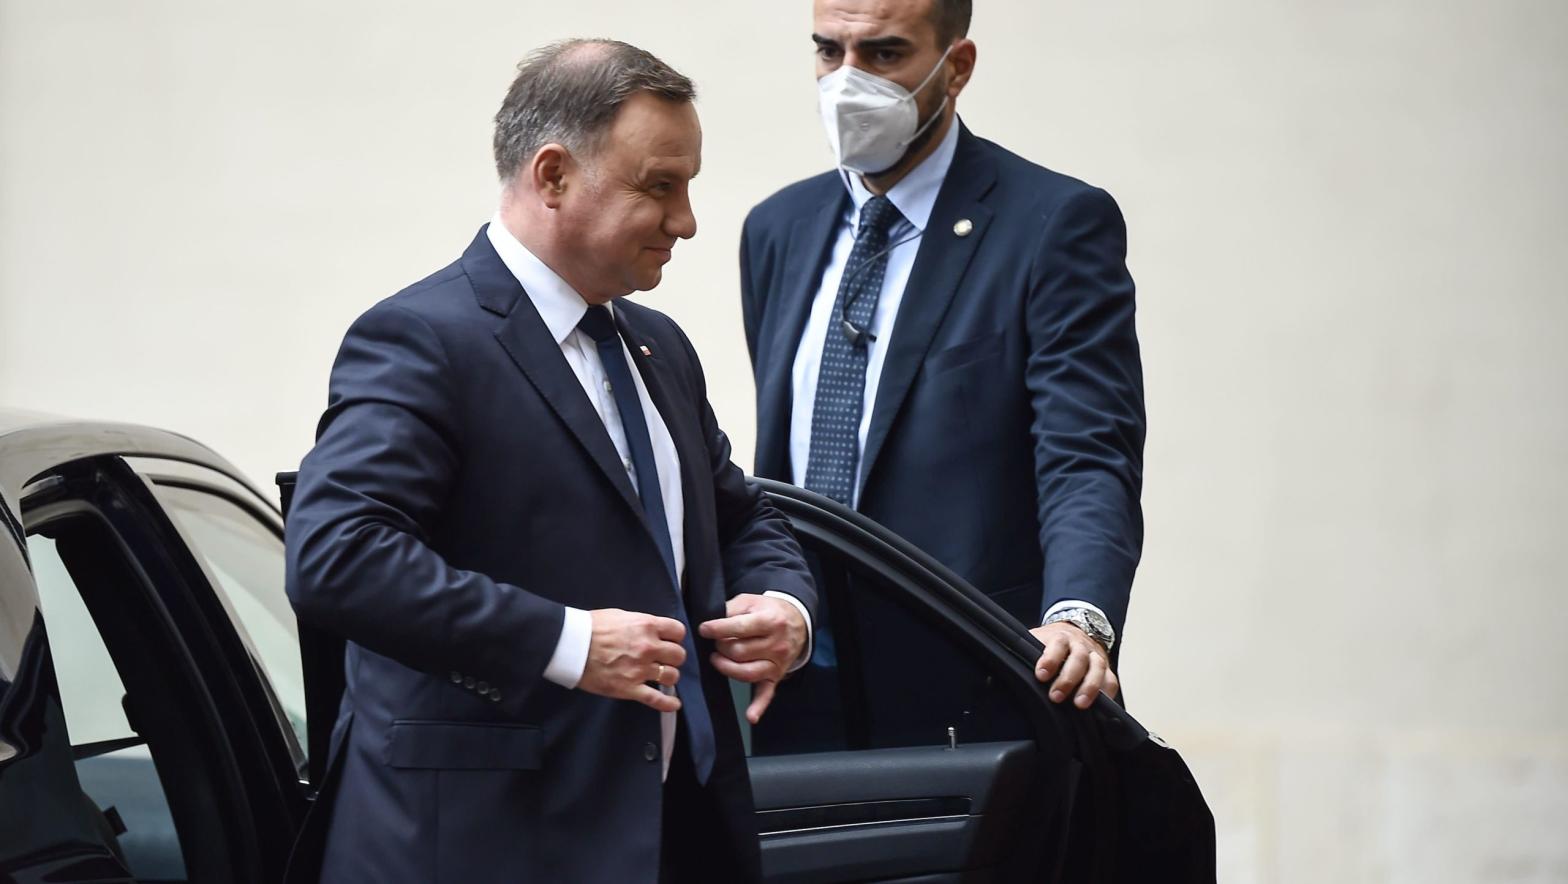 Poland's President Andrzej Duda, the moron in question, gets out of his car as he arrives at The Vatican on September 25, 2020. (Photo: Filippo Monteforte/AFP, Getty Images)